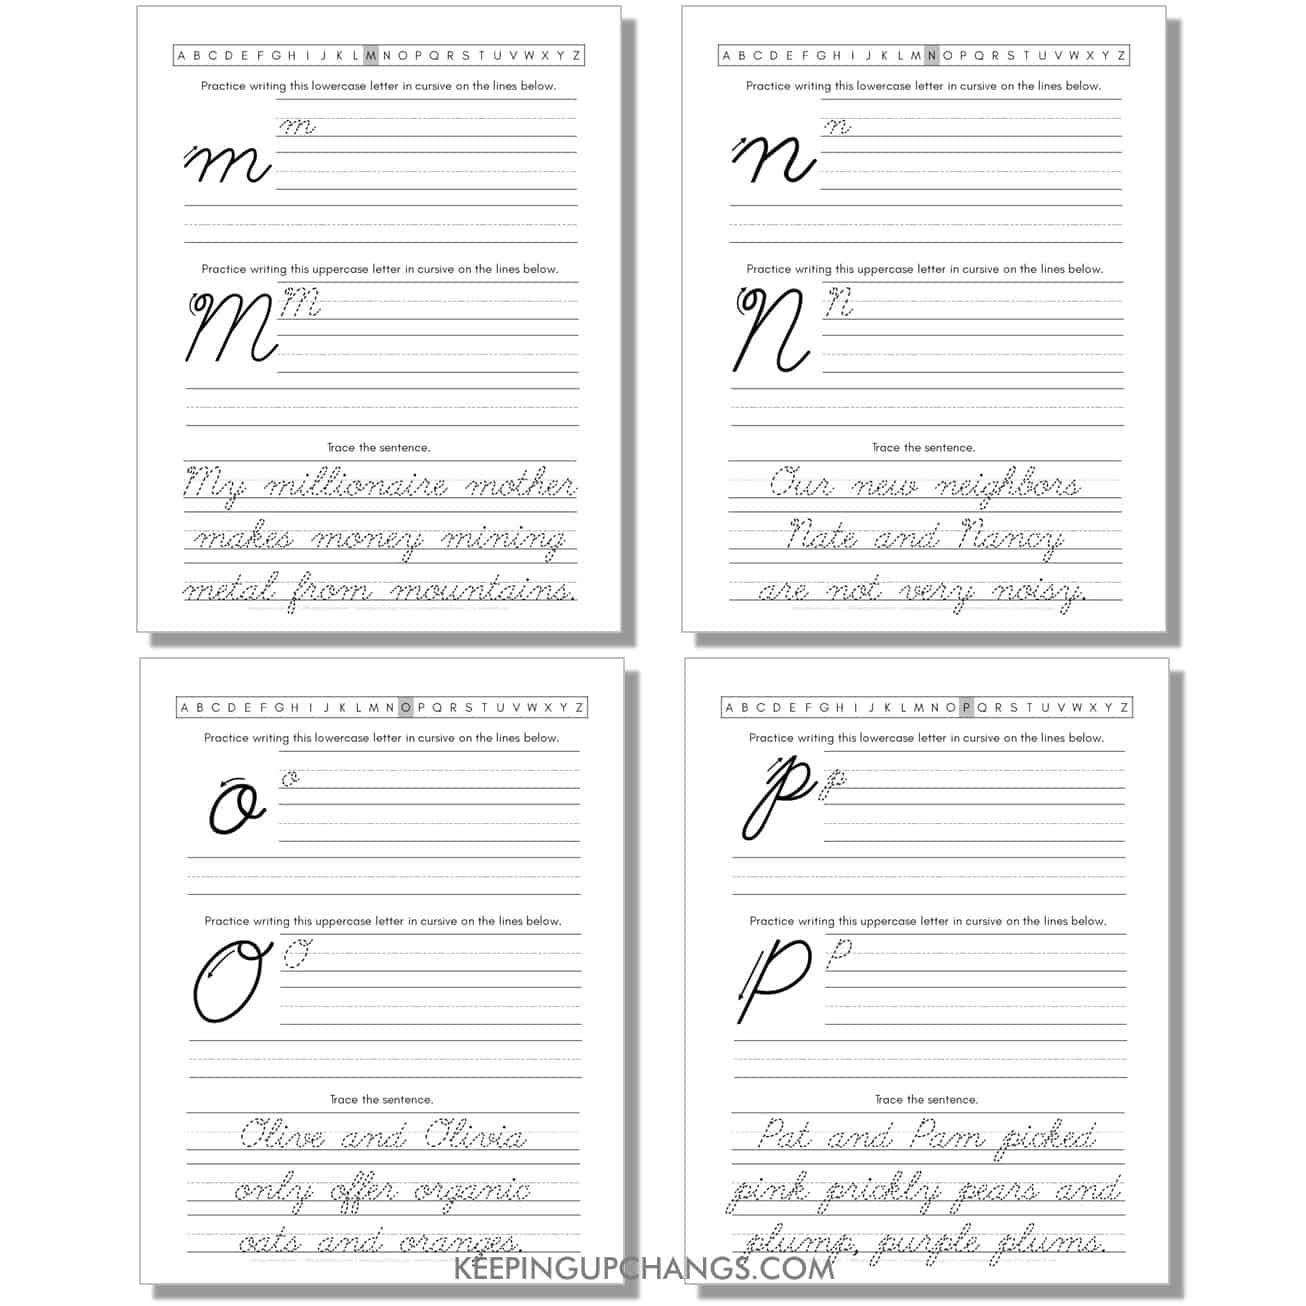 cursive worksheet with uppercase, lowercase letters and sentences for m, n, o, p.